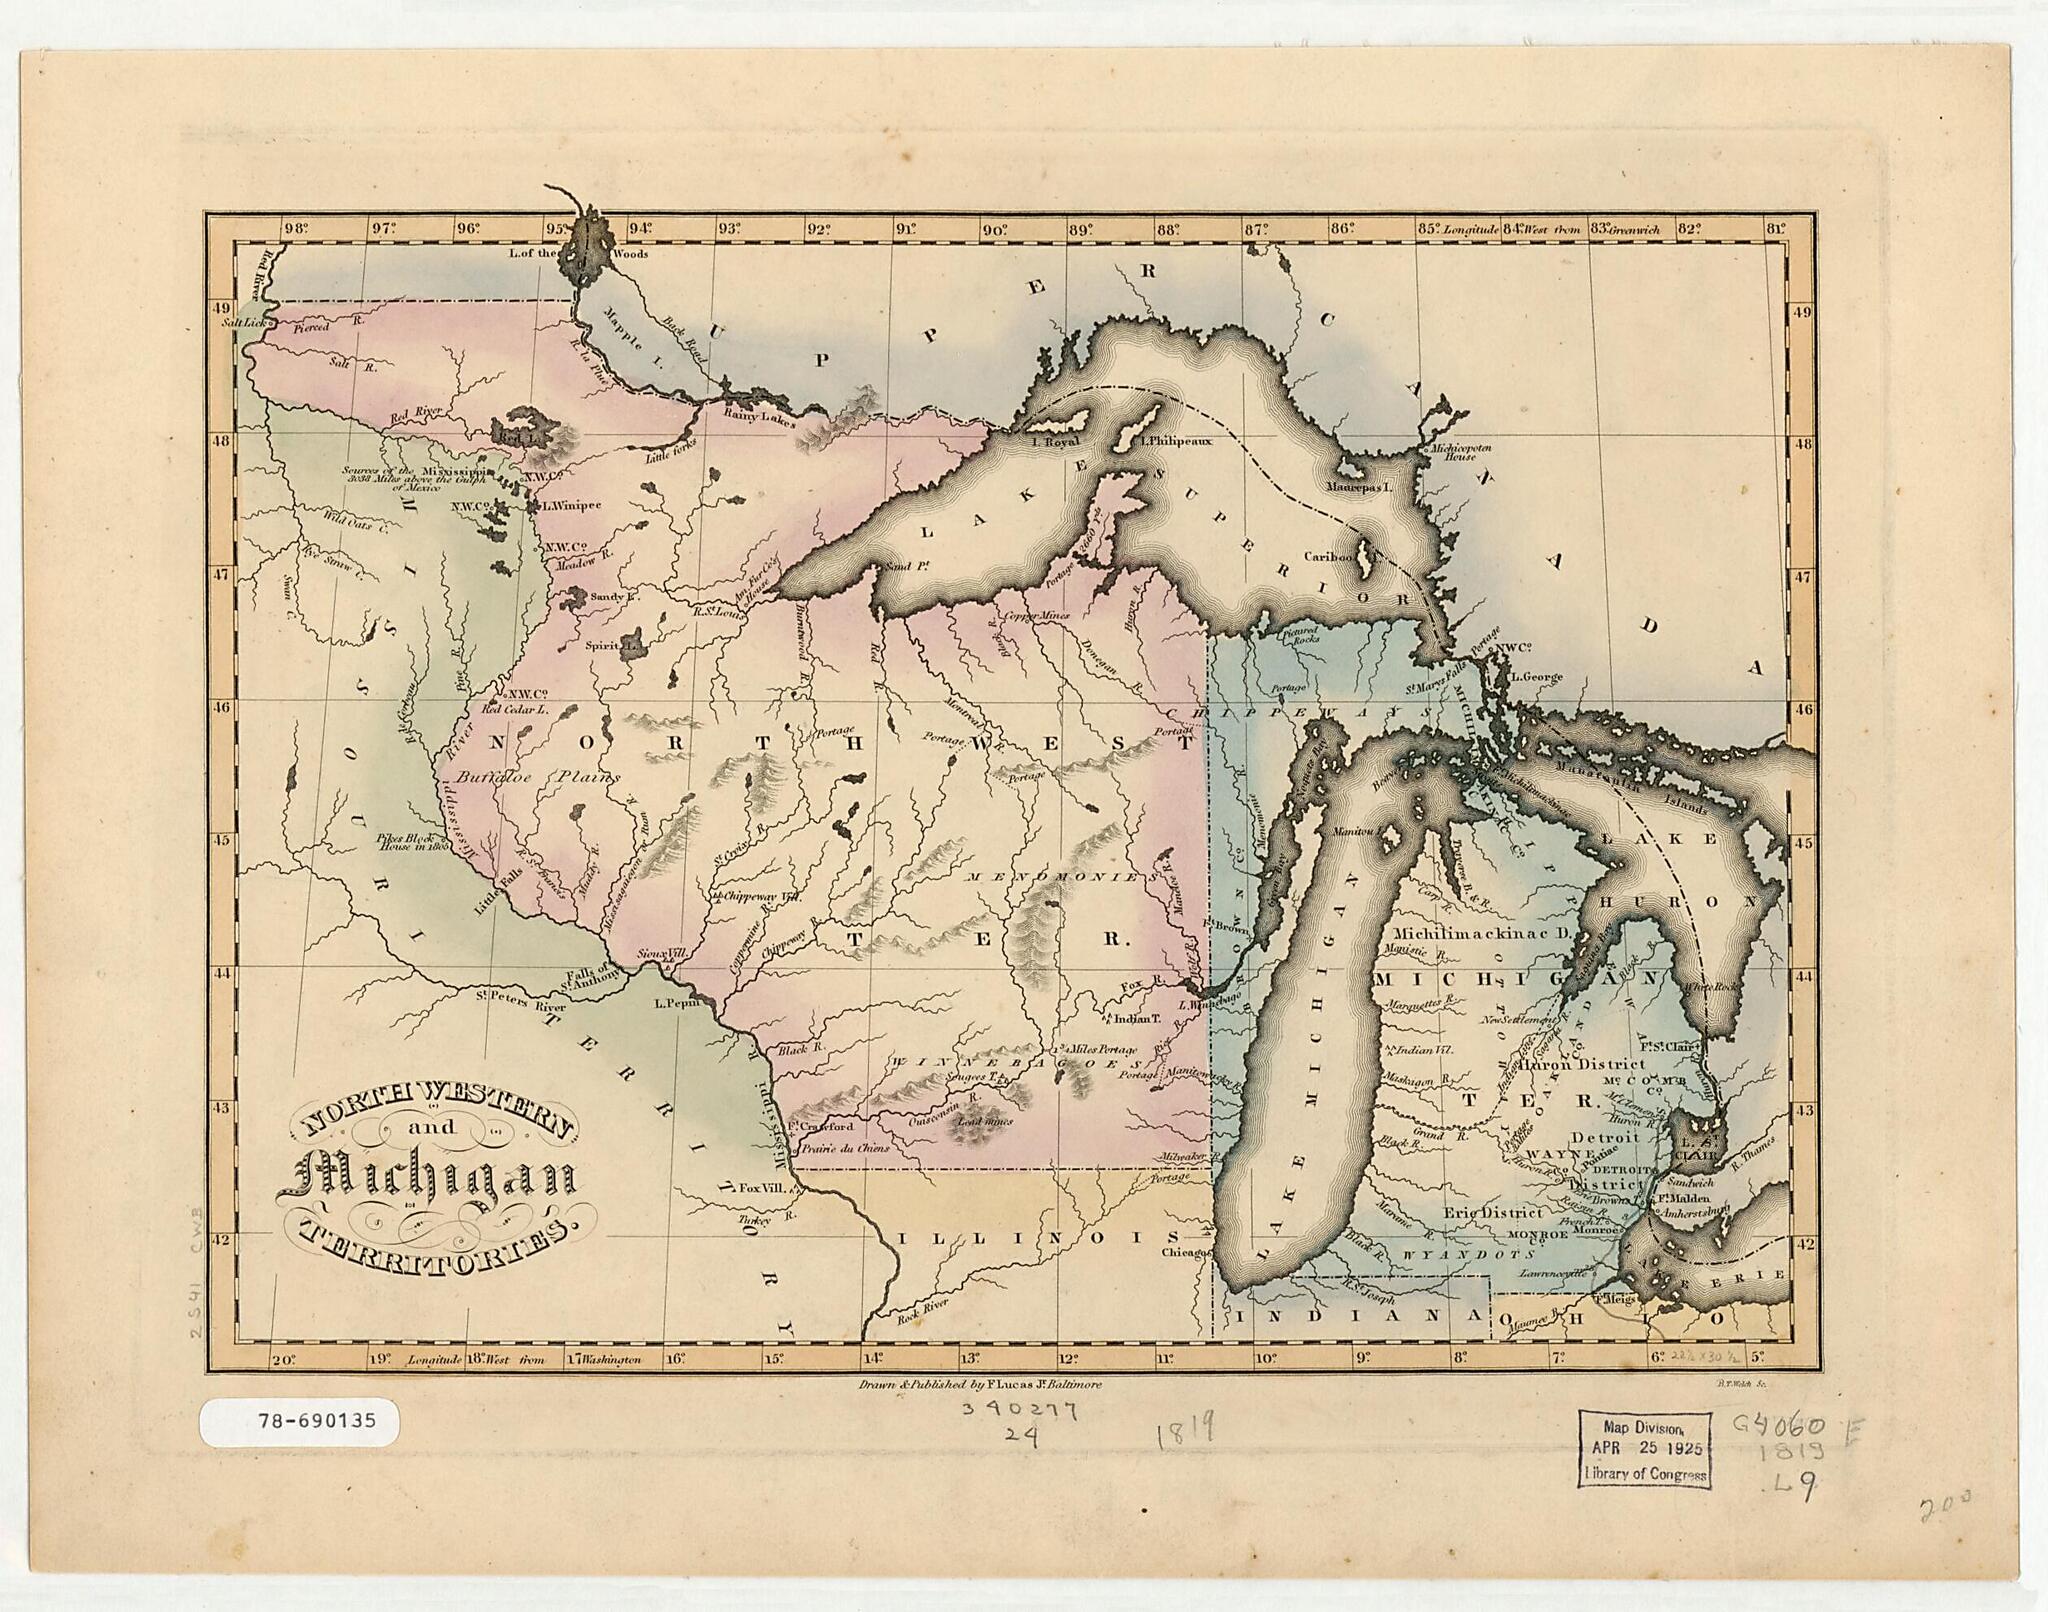 This old map of North Western and Michigan Territories from 1819 was created by Fielding Lucas, B. T. (Bartholomew Trow) Welch in 1819